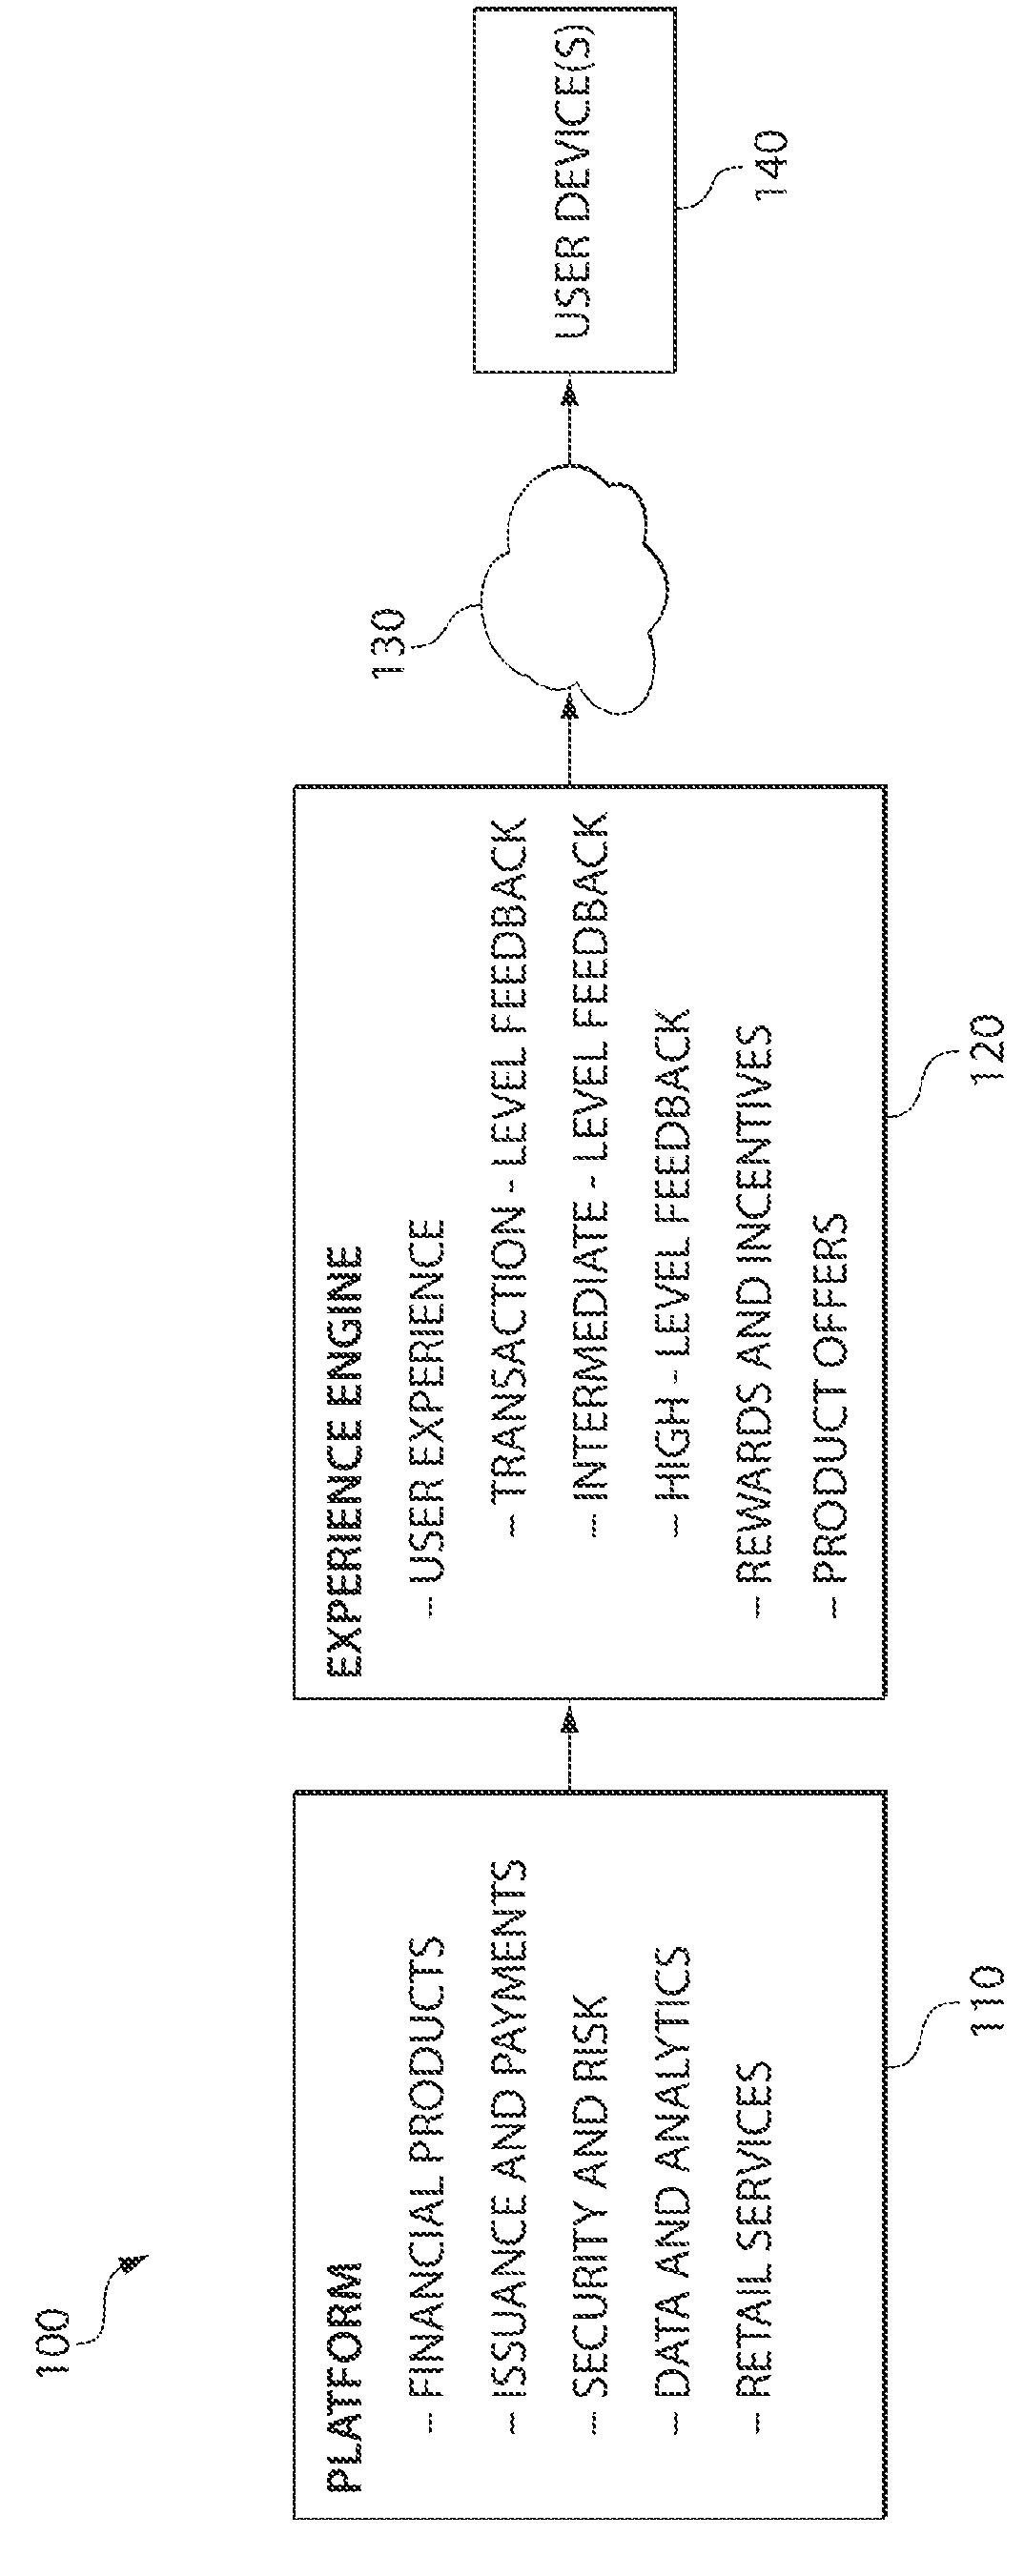 Methods and apparatus for promoting financial behavioral change